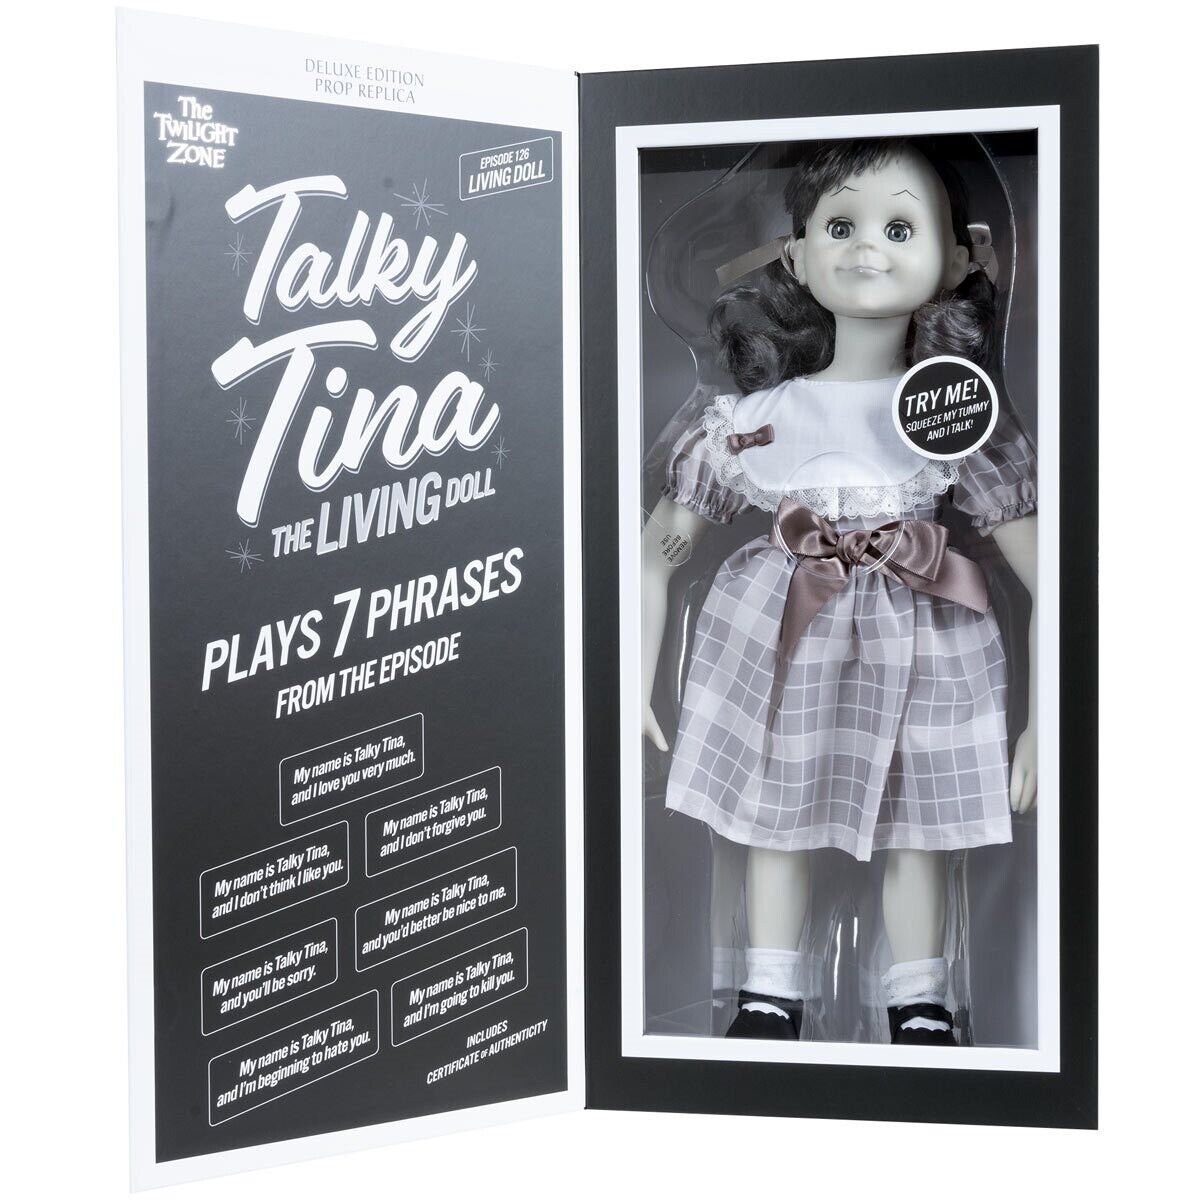 The Twilight Zone Talky Tina 18-Inch Prop Replica Doll Limited Edition 526/ 1004